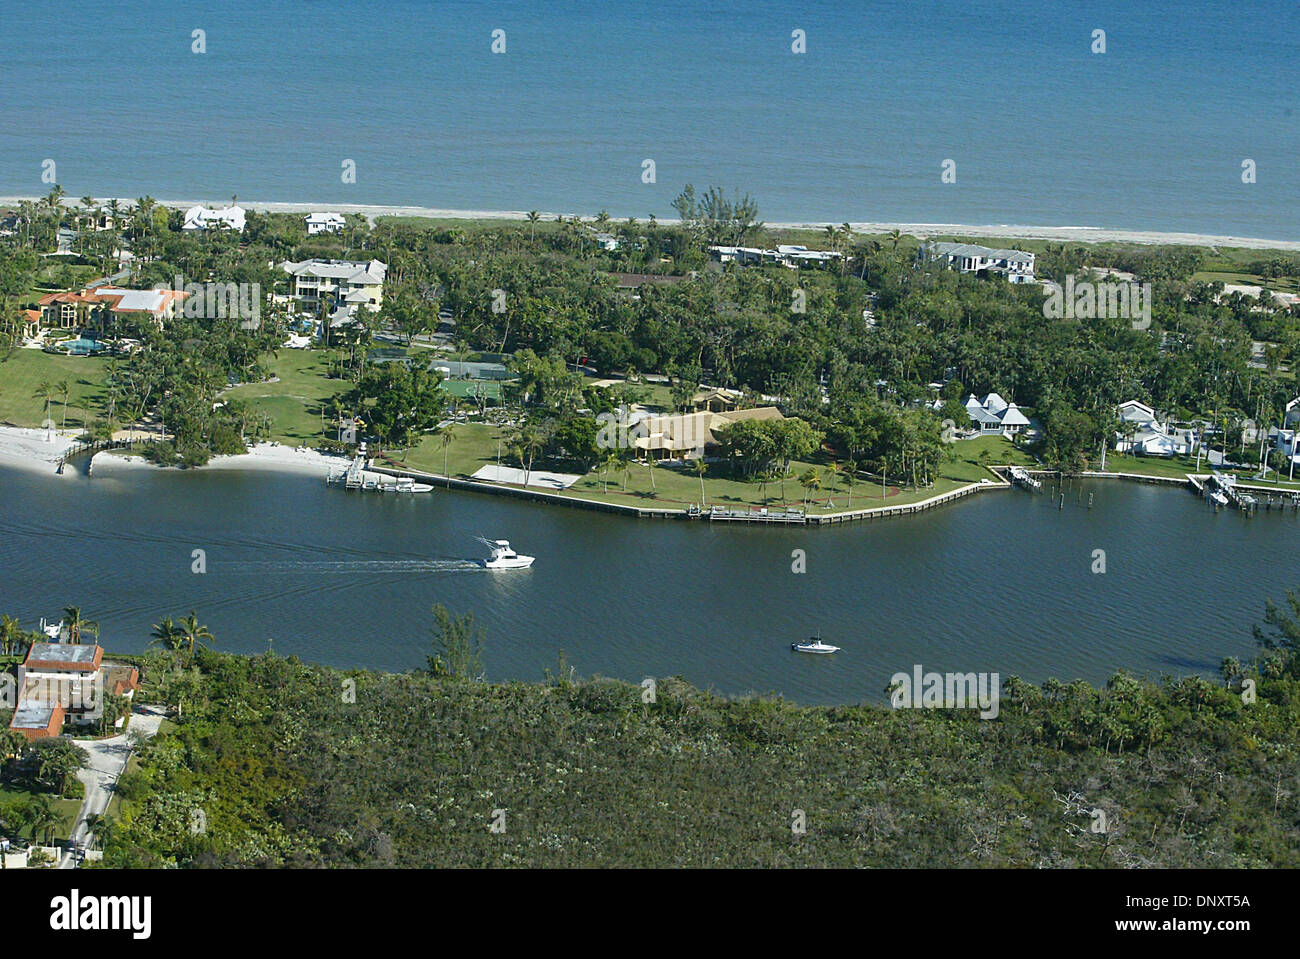 Dec 28, 2005; Jupiter Island, FL, USA; Tiger Woods reportedly has bought the former Churck Curcio estate on Jupiter Island. It's 10 acres that run from the ICW to the ocean. There's a yellow house on the ICW side of the property, and a sleek white yacht with outriggers tied up at the dock to the north of the yellow house. There are 4 houses on the property: 2 to the north of the ye Stock Photo